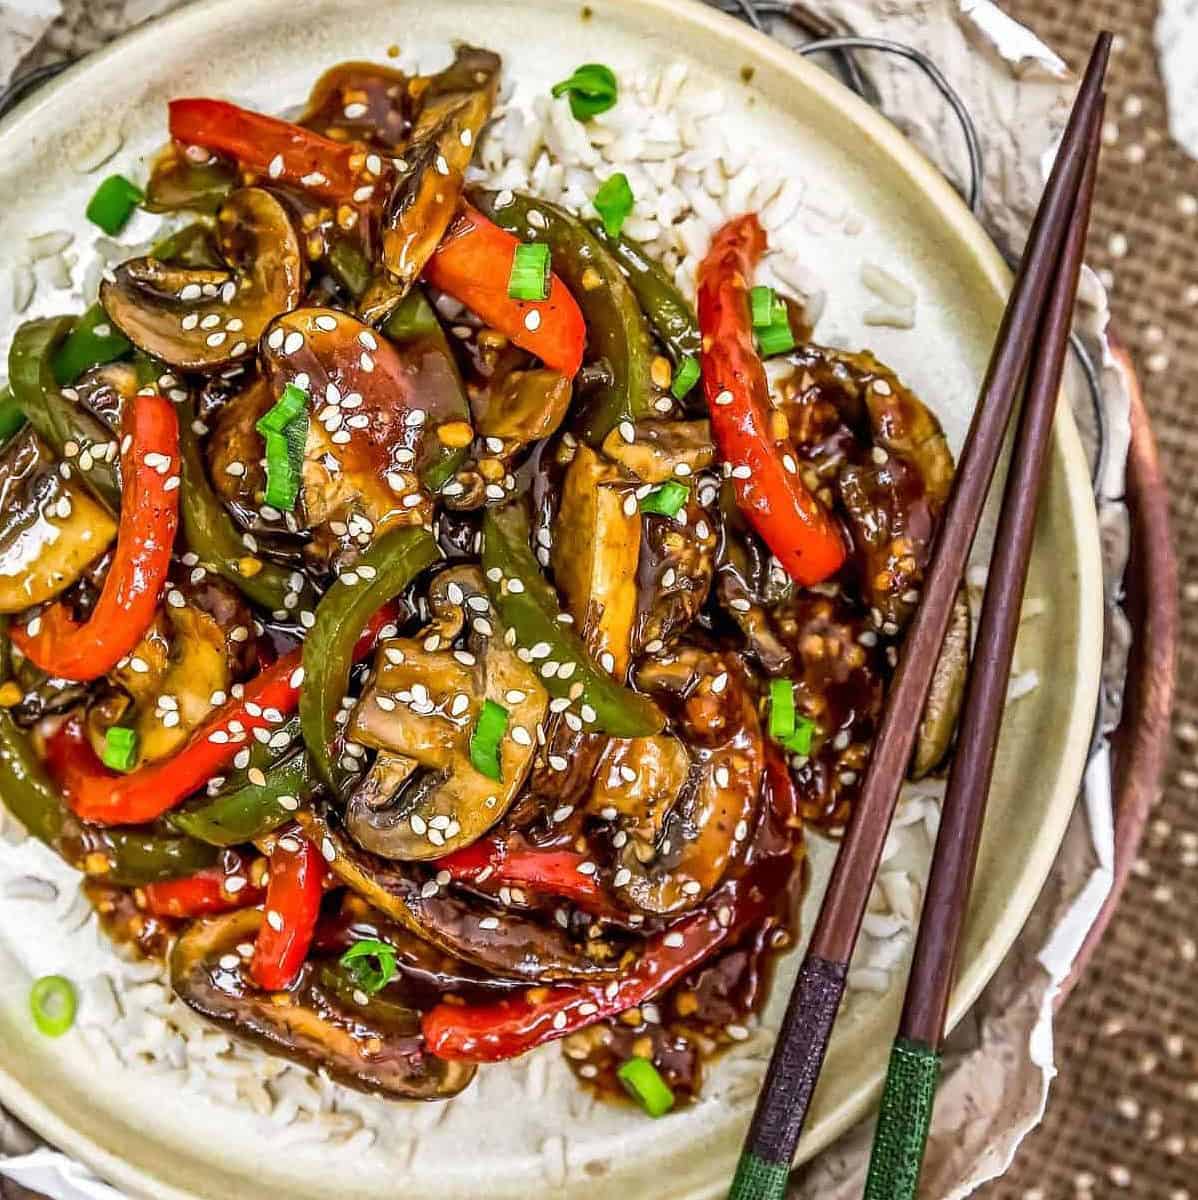  These bell pepper steaks are almost too pretty to eat. Almost.